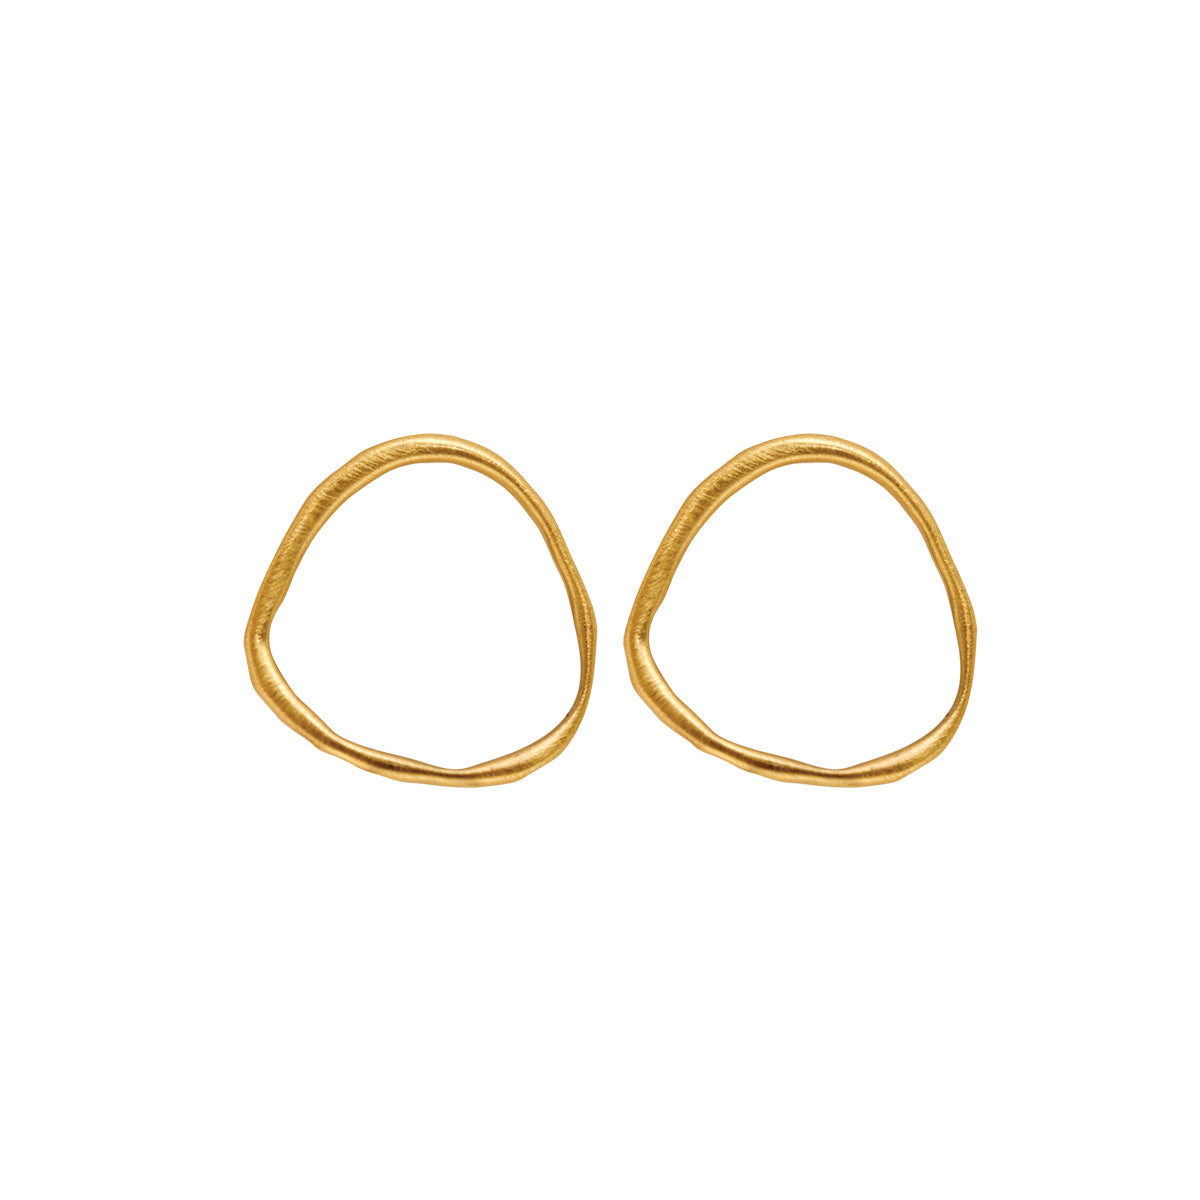 Dansk - Eve sculptured earrings, gold colour ion platinum with surgical steel, 3cm